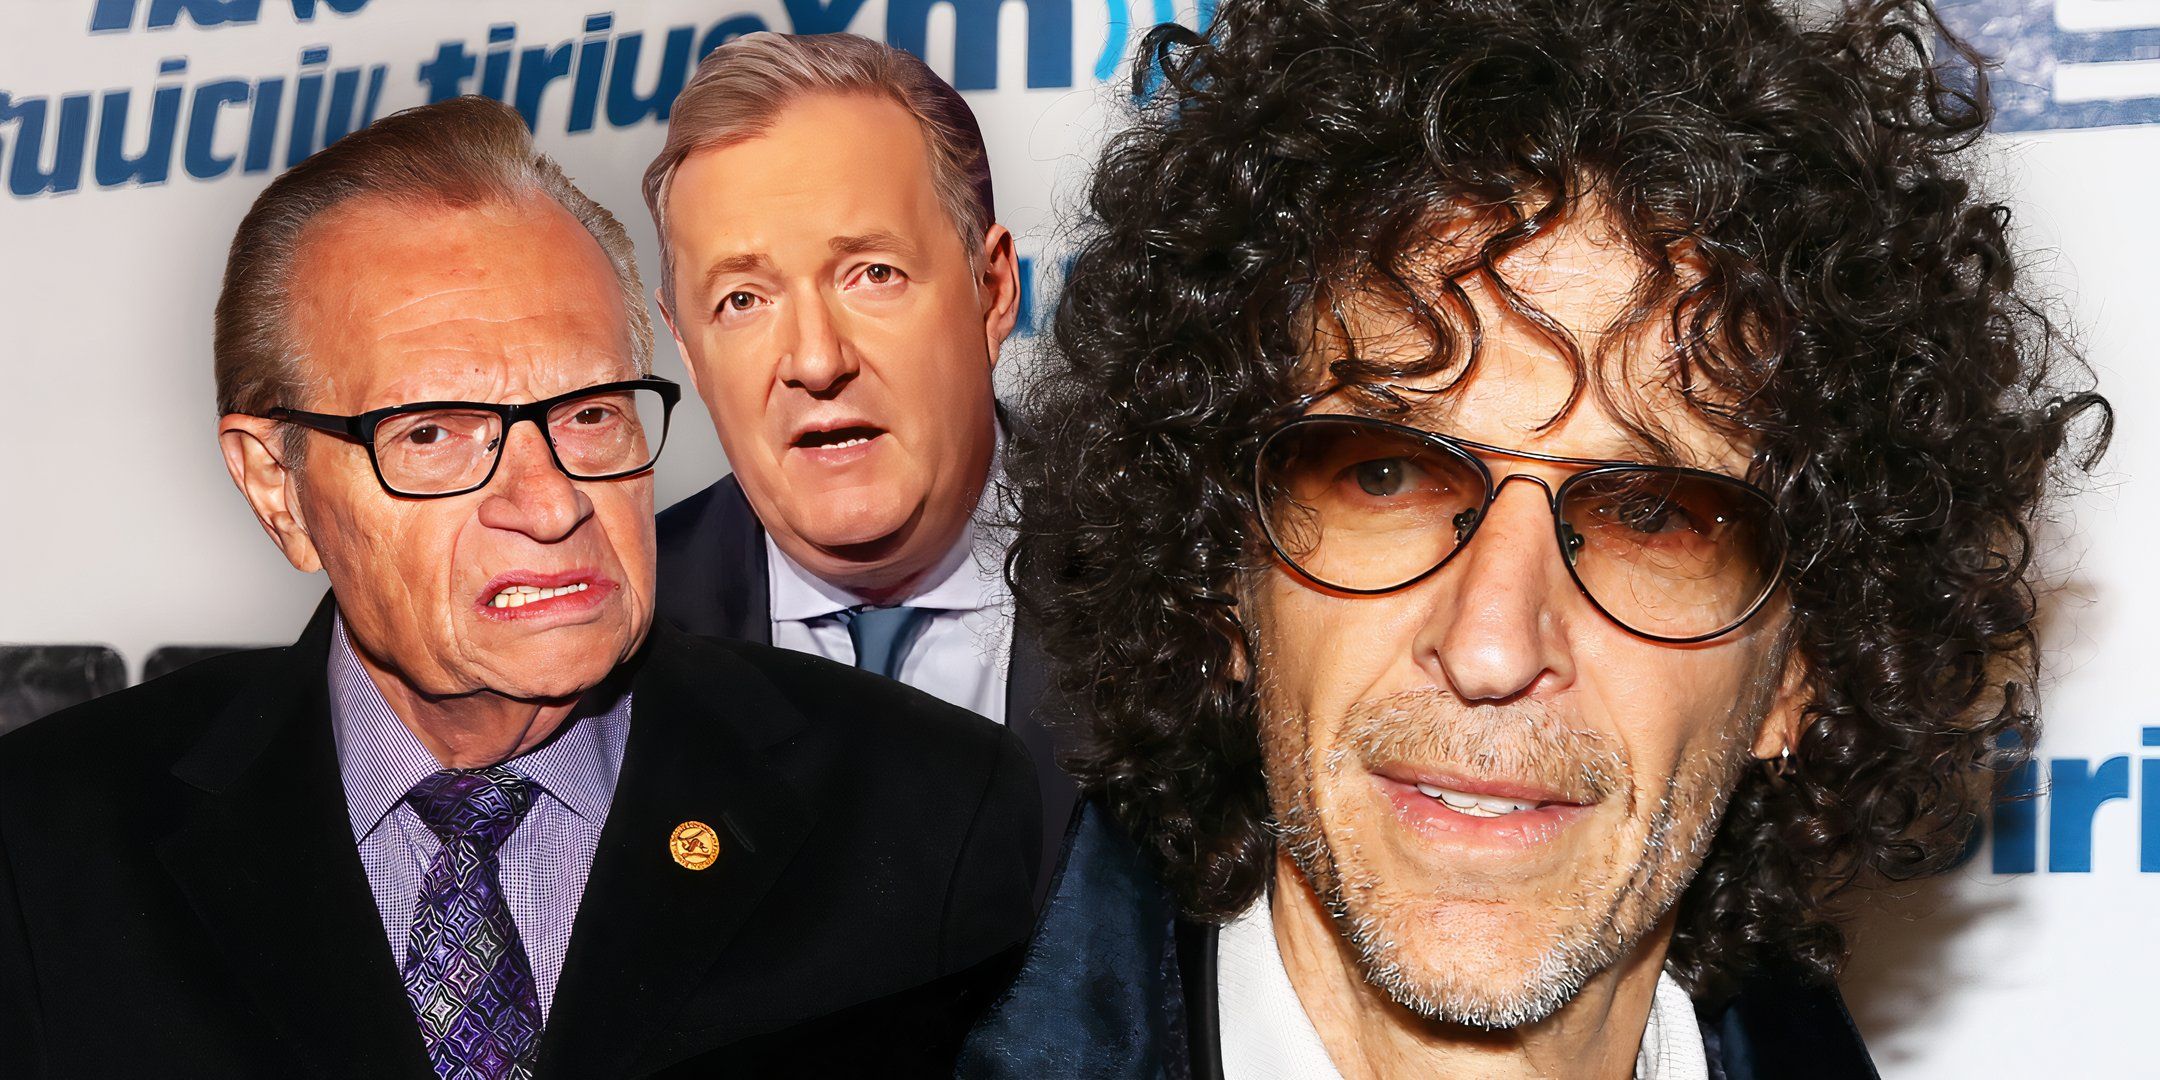 Howard Stern with Larry King and Piers Morgan